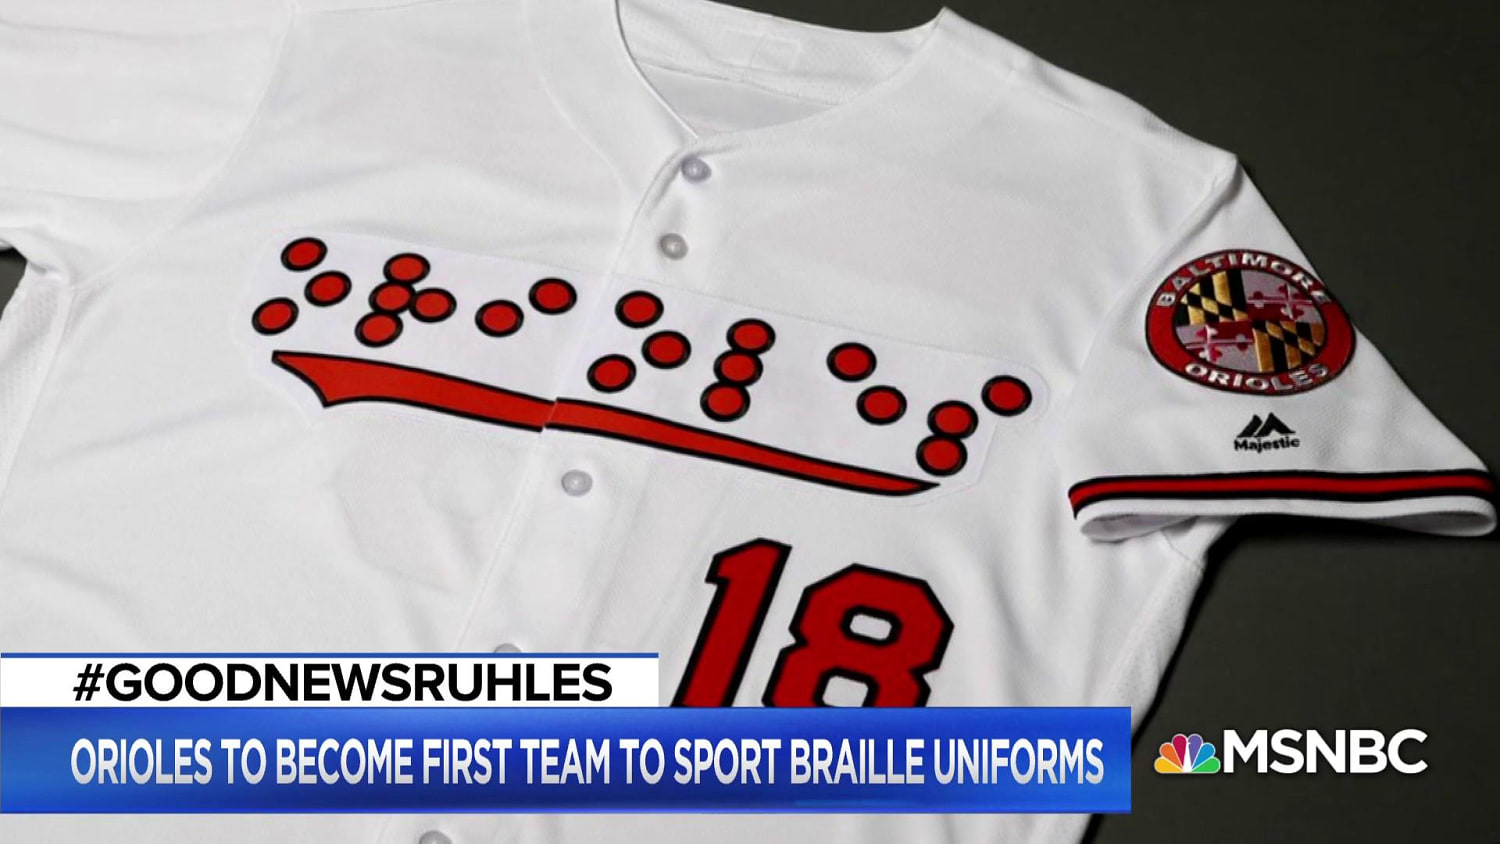 Baltimore Orioles feature braille letters on jerseys